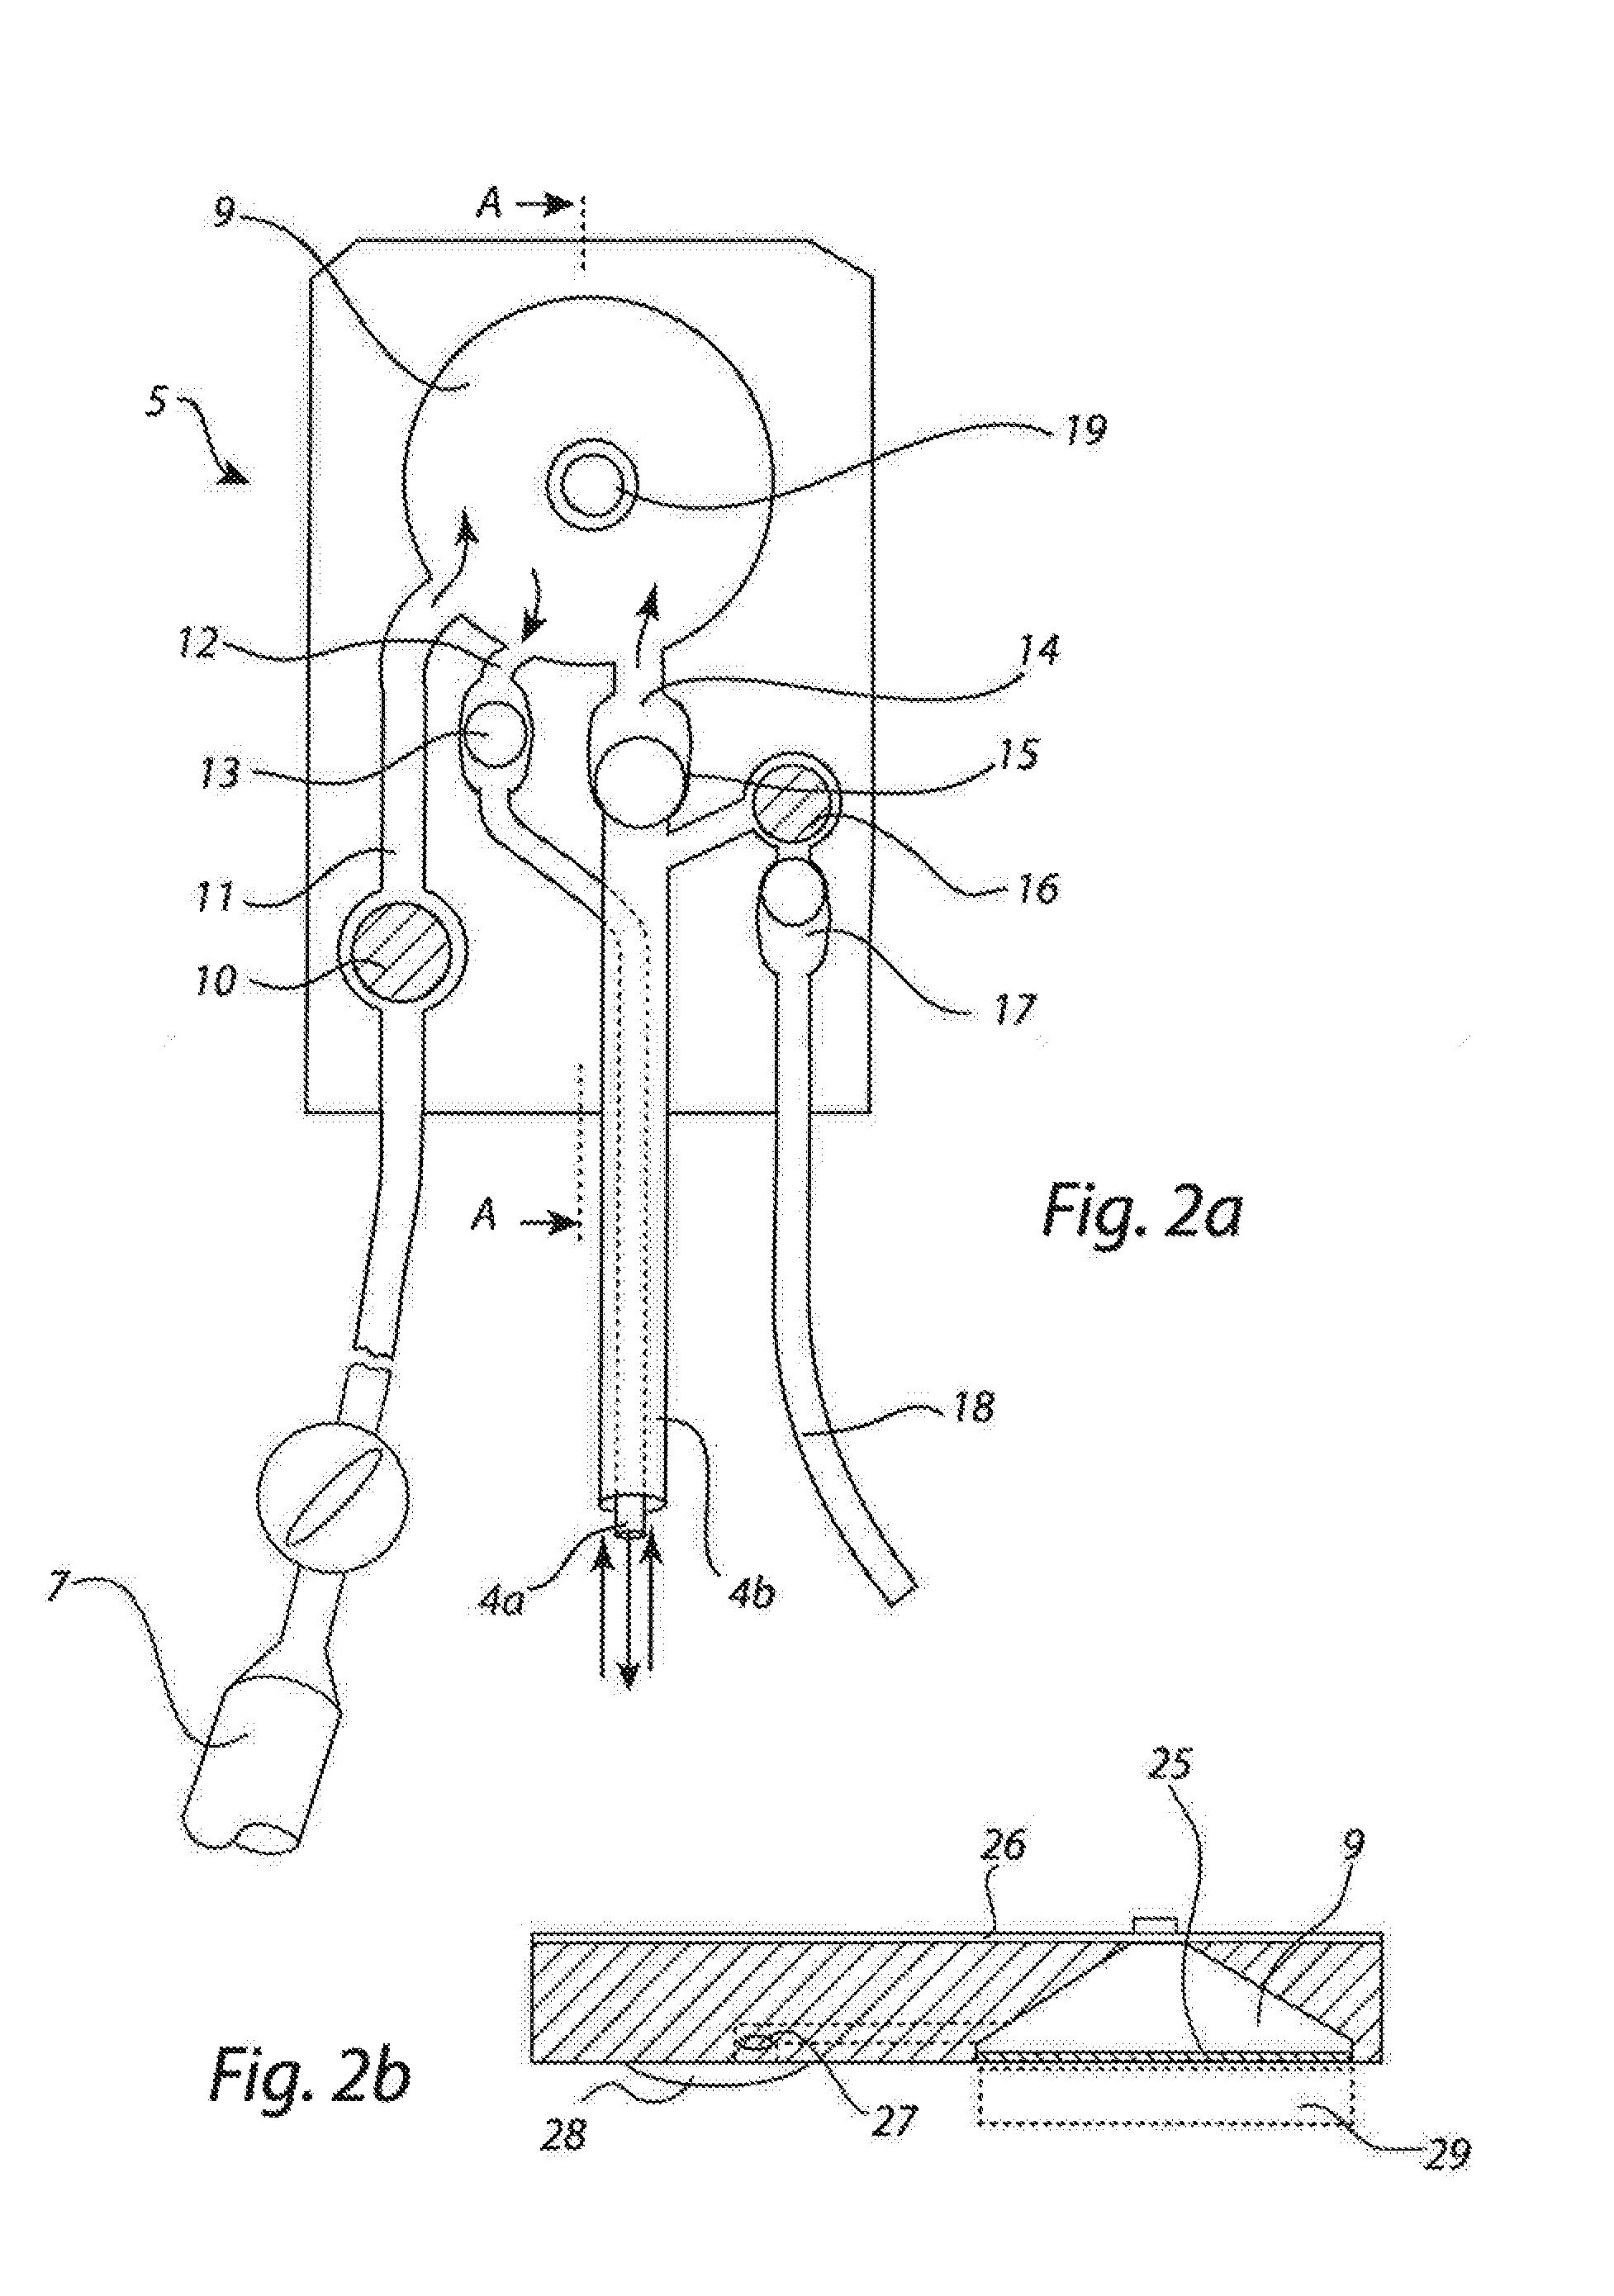 Apparatus for performing heat treatment